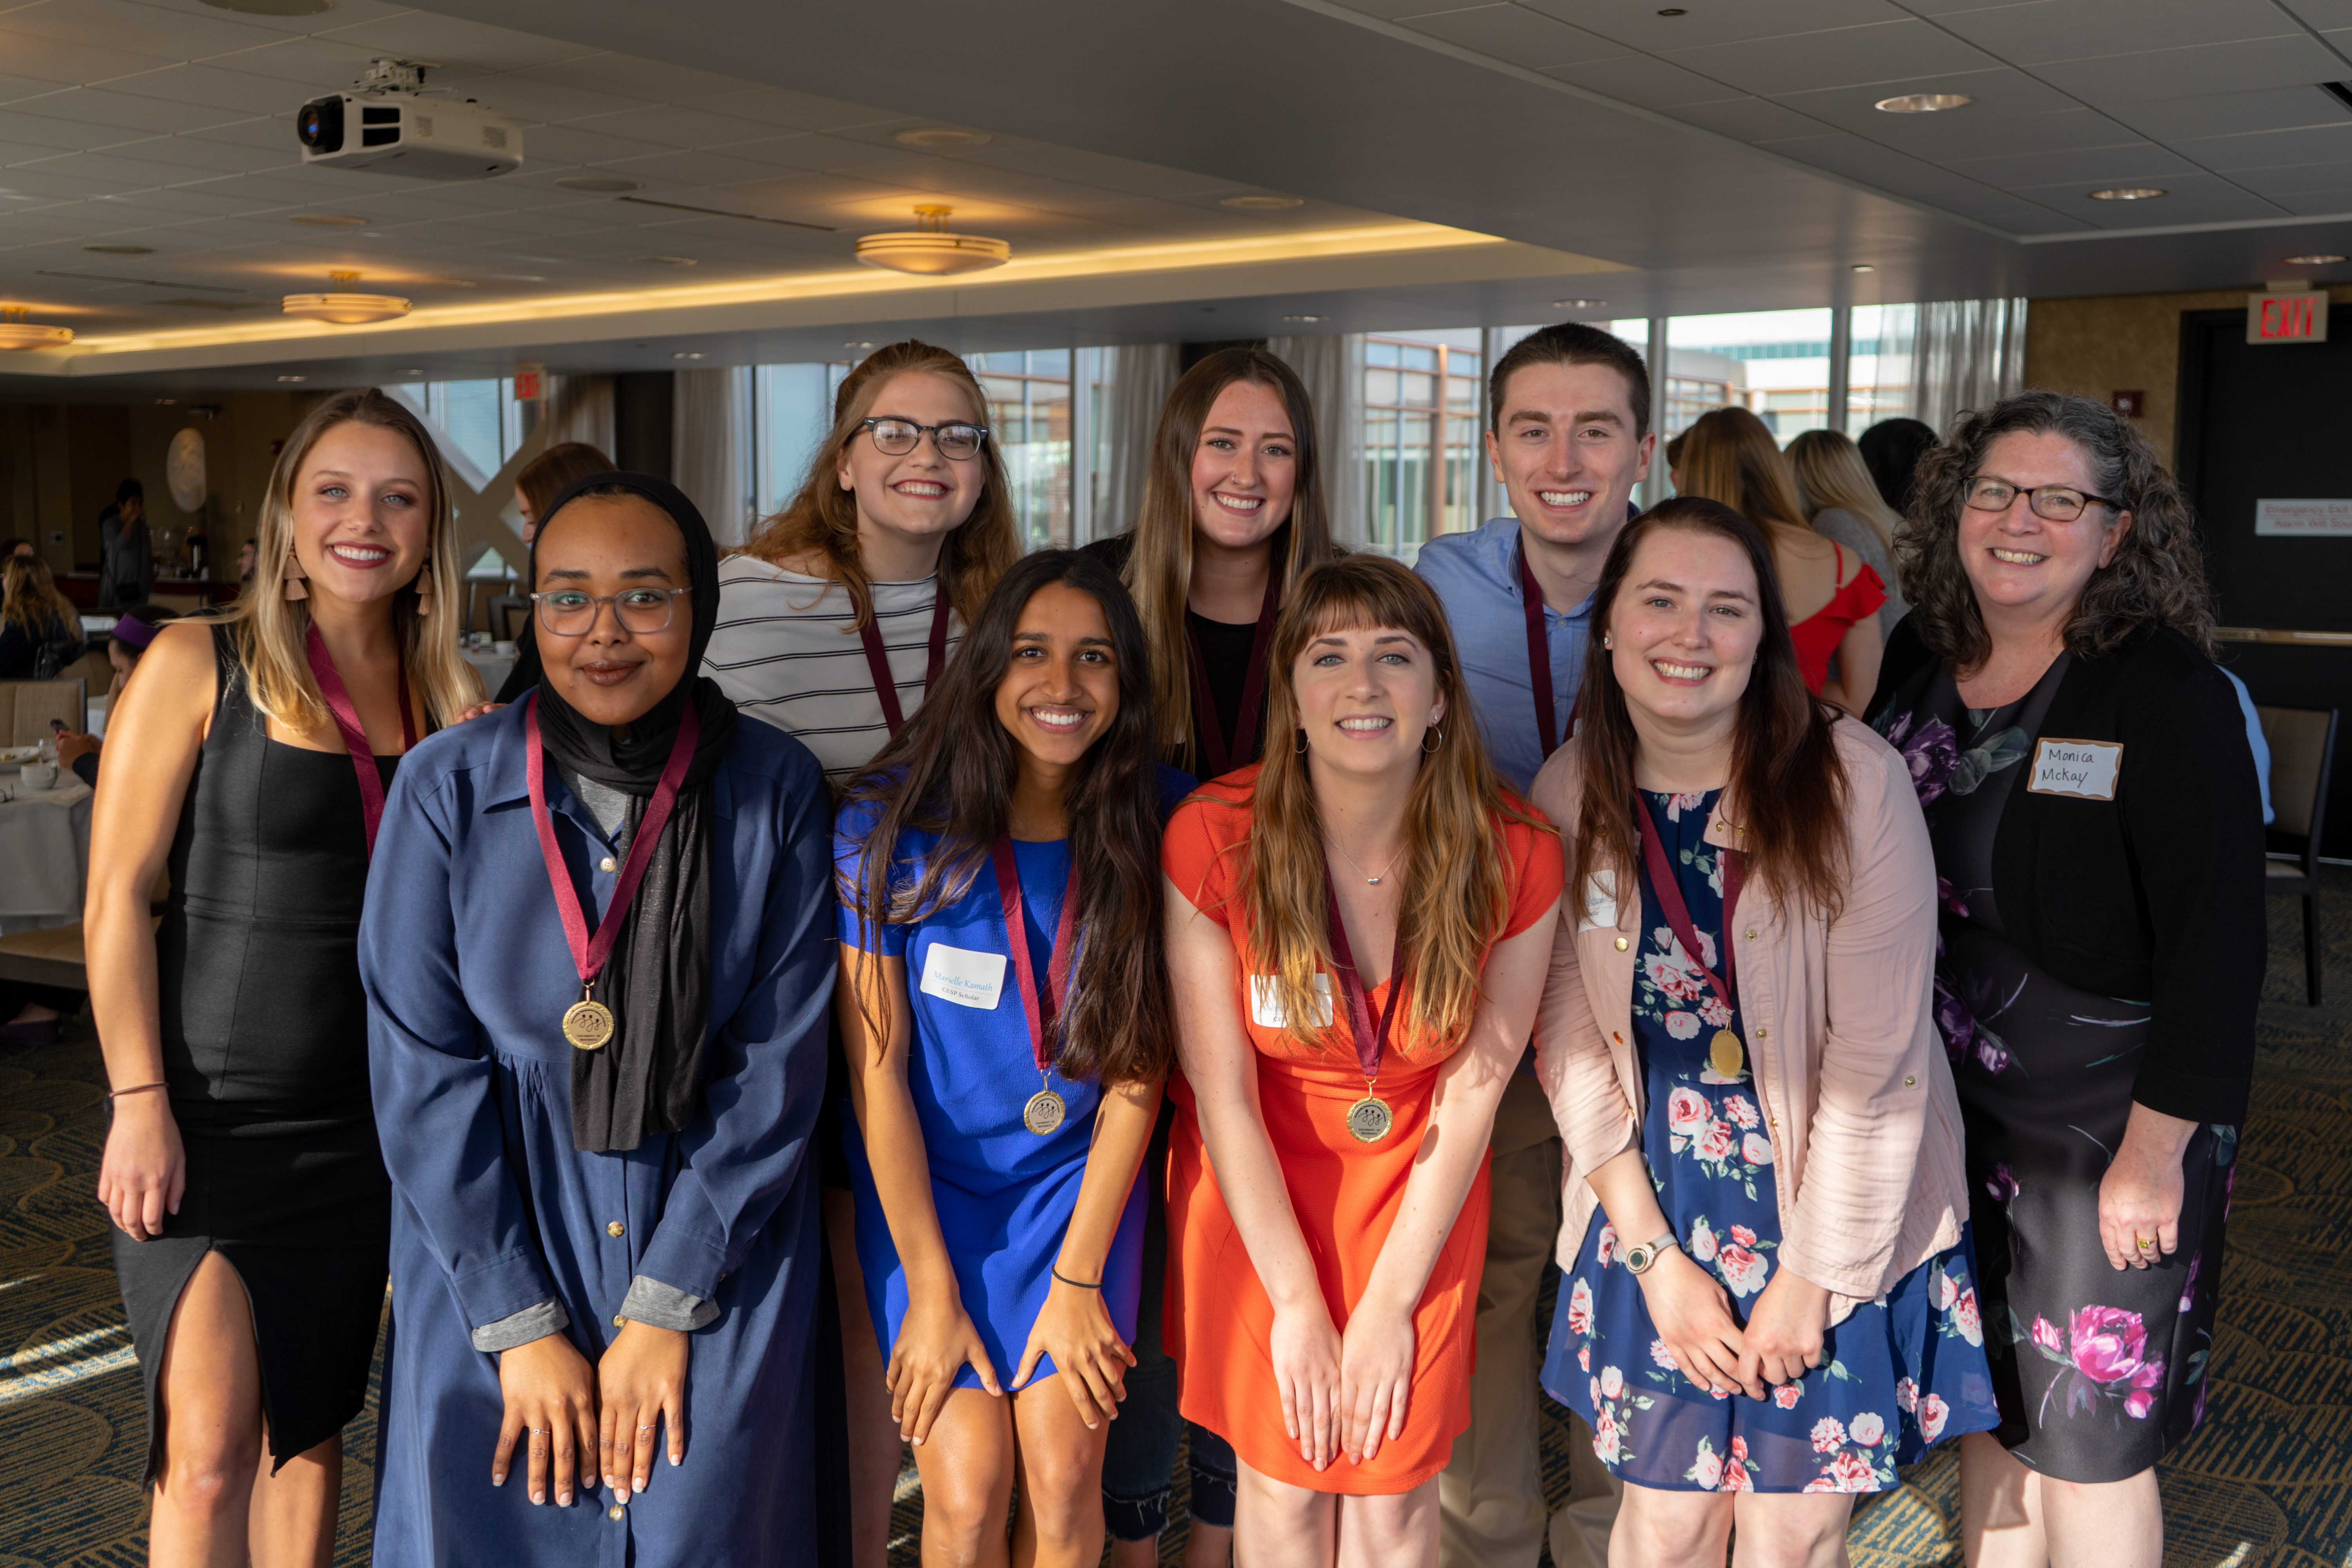 Reception photo of scholars wearing medals